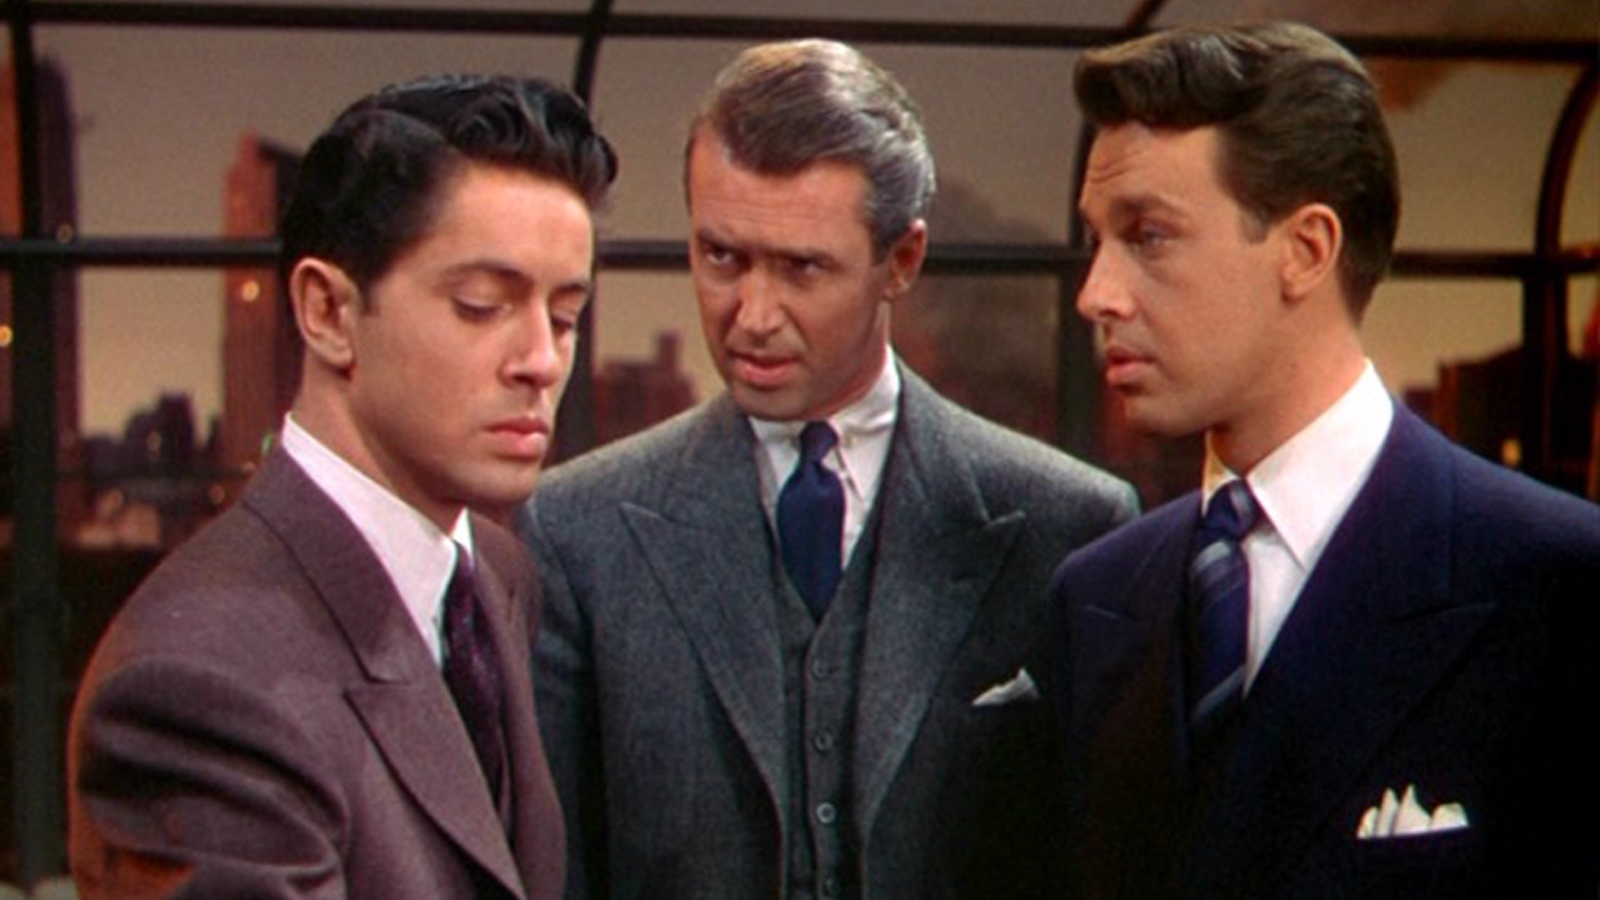 Three men stand in a room by a large window during sunset, all three wear suits, while the older man in the middle looks intently at the man on the left, who looks away painfully